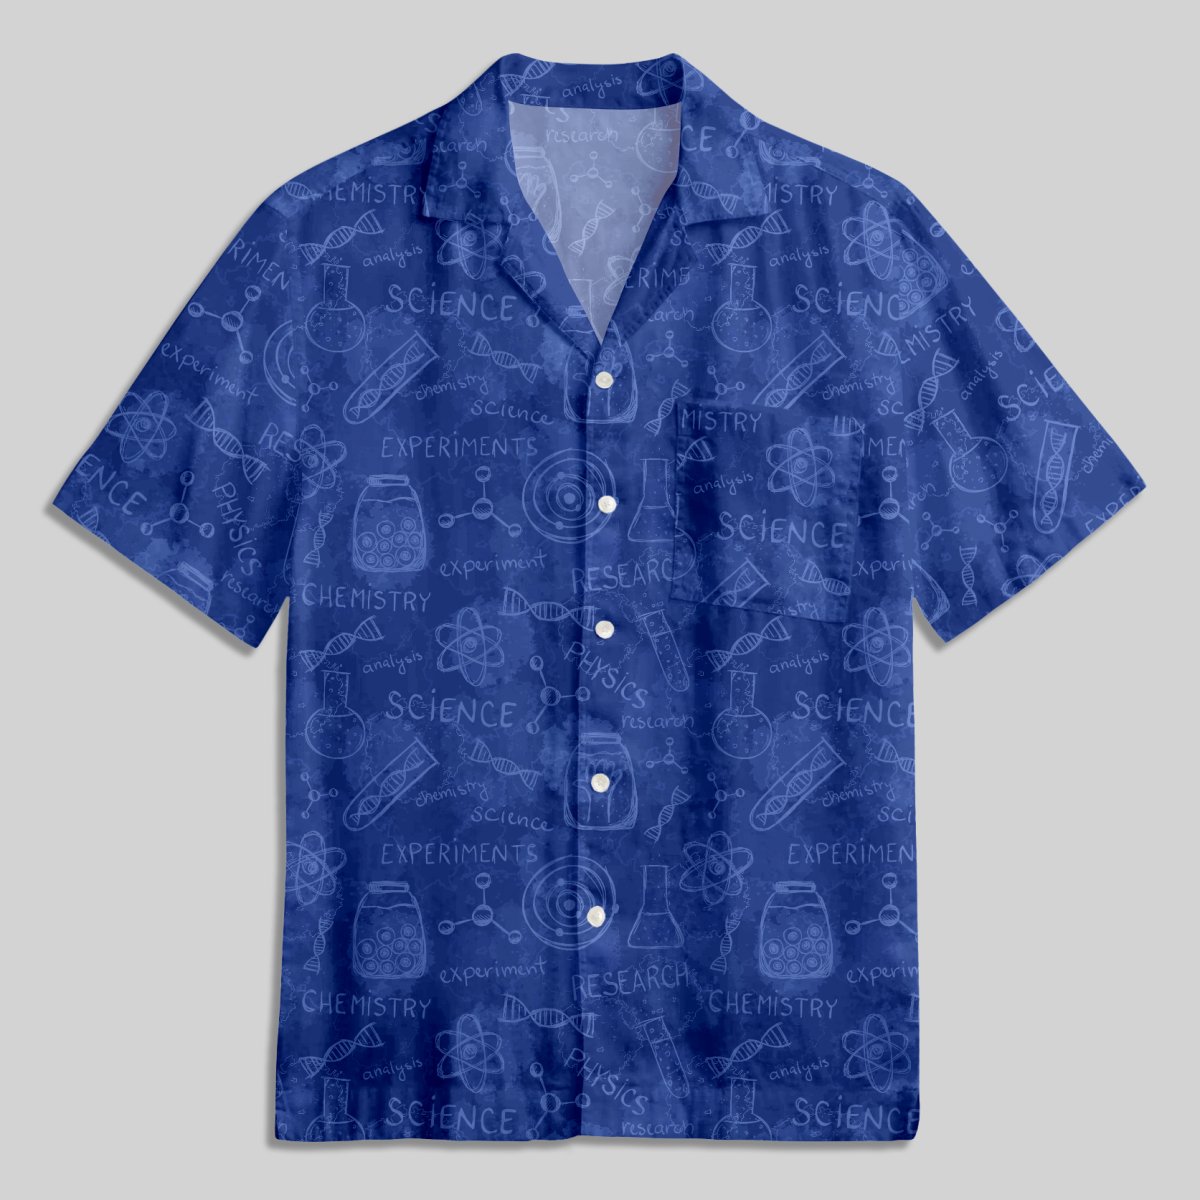 Science Chemistry Experiment Button Up Pocket Shirt - Geeksoutfit